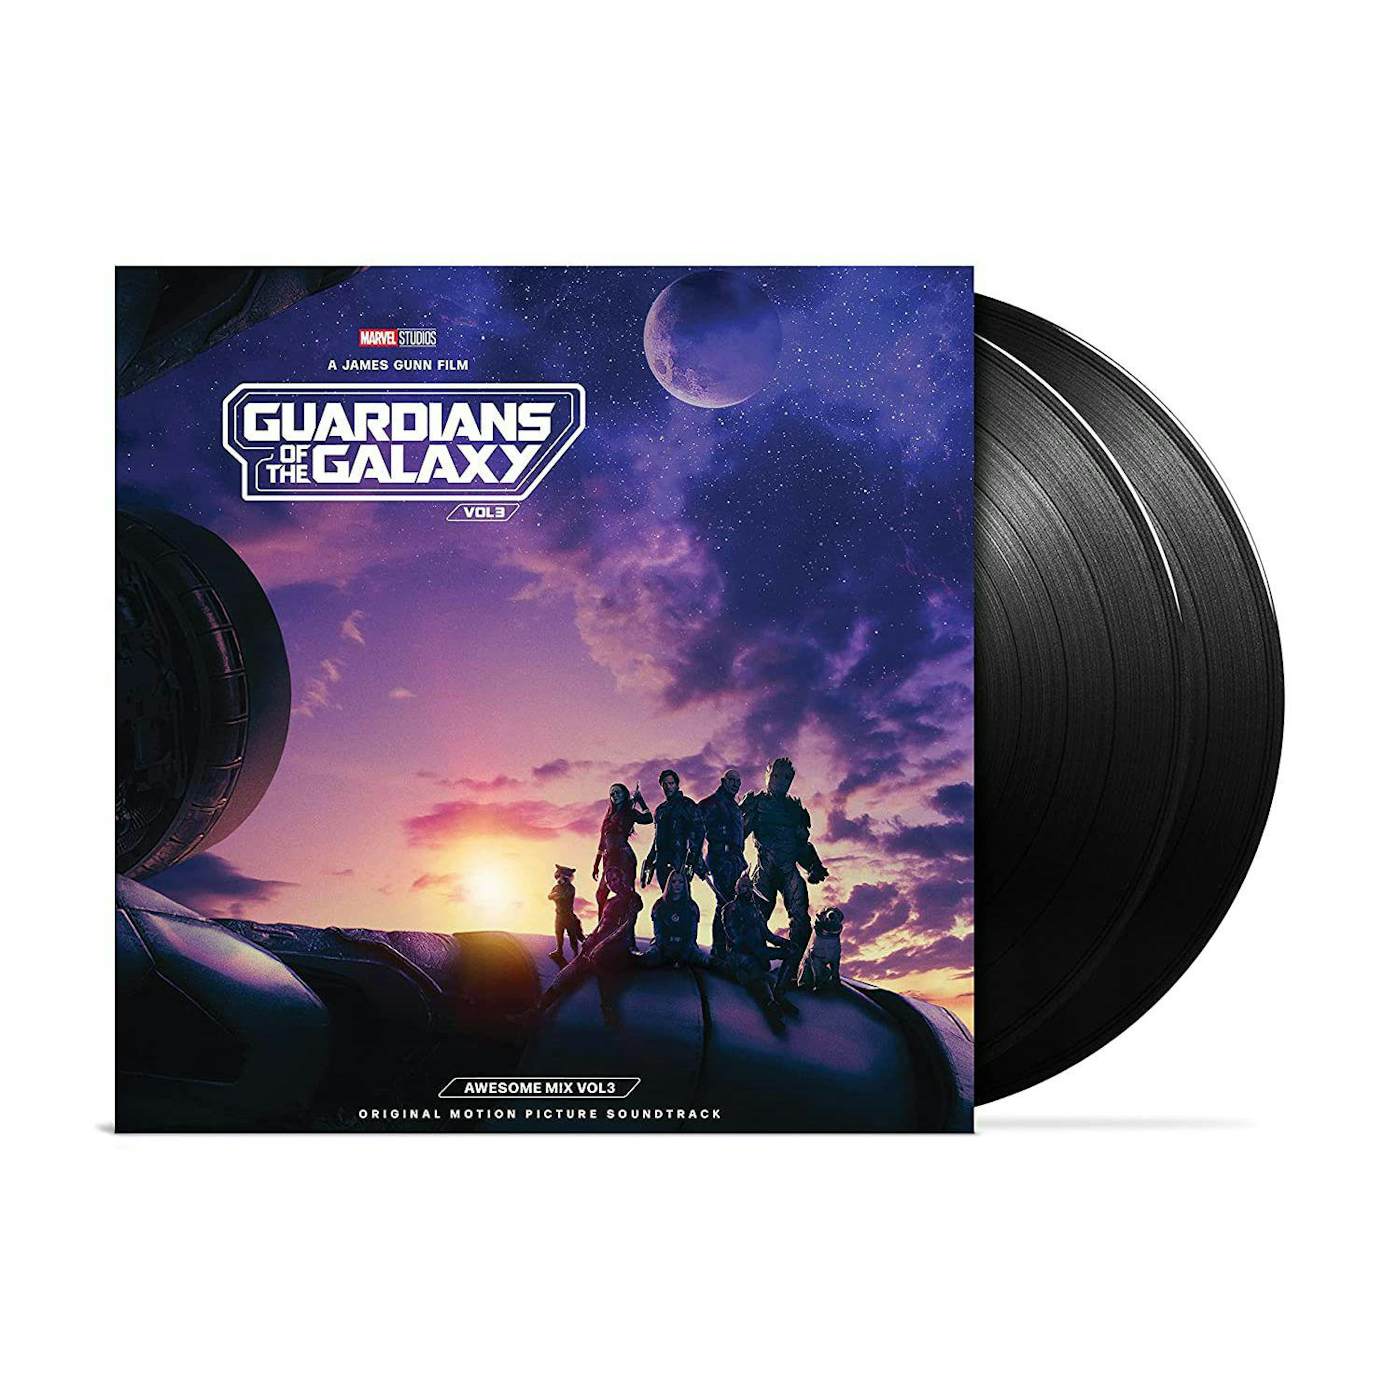 Guardians Of The Galaxy 3: Awesome Mix Vol 3 / Var Guardians Of The Galaxy Vol. 3: Awesome Mix Vol. 3 (2LP) Vinyl Record